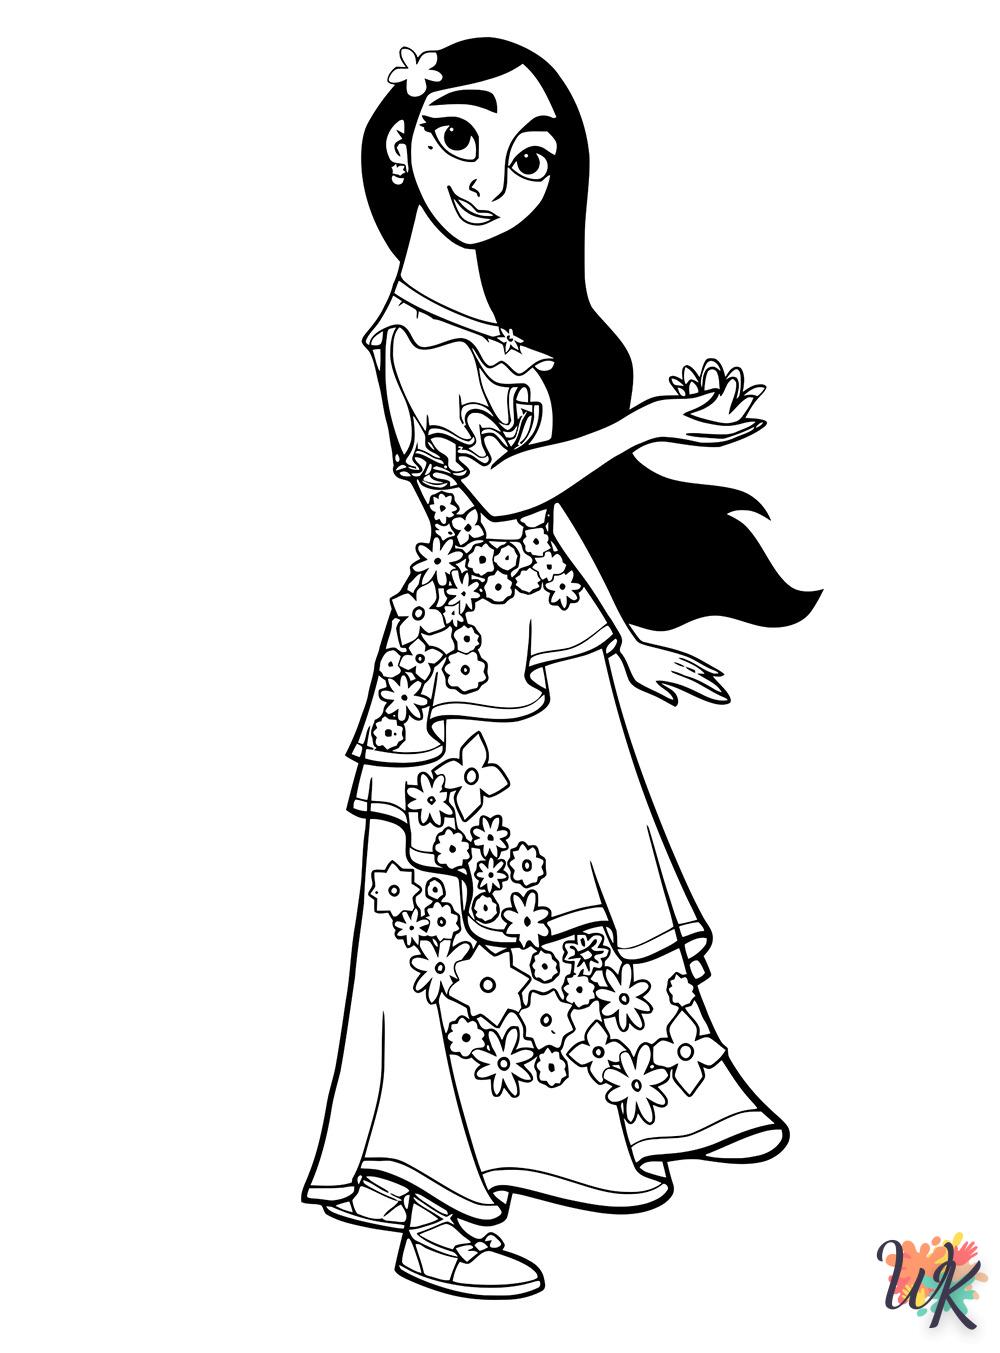 coloring pages for kids Encanto